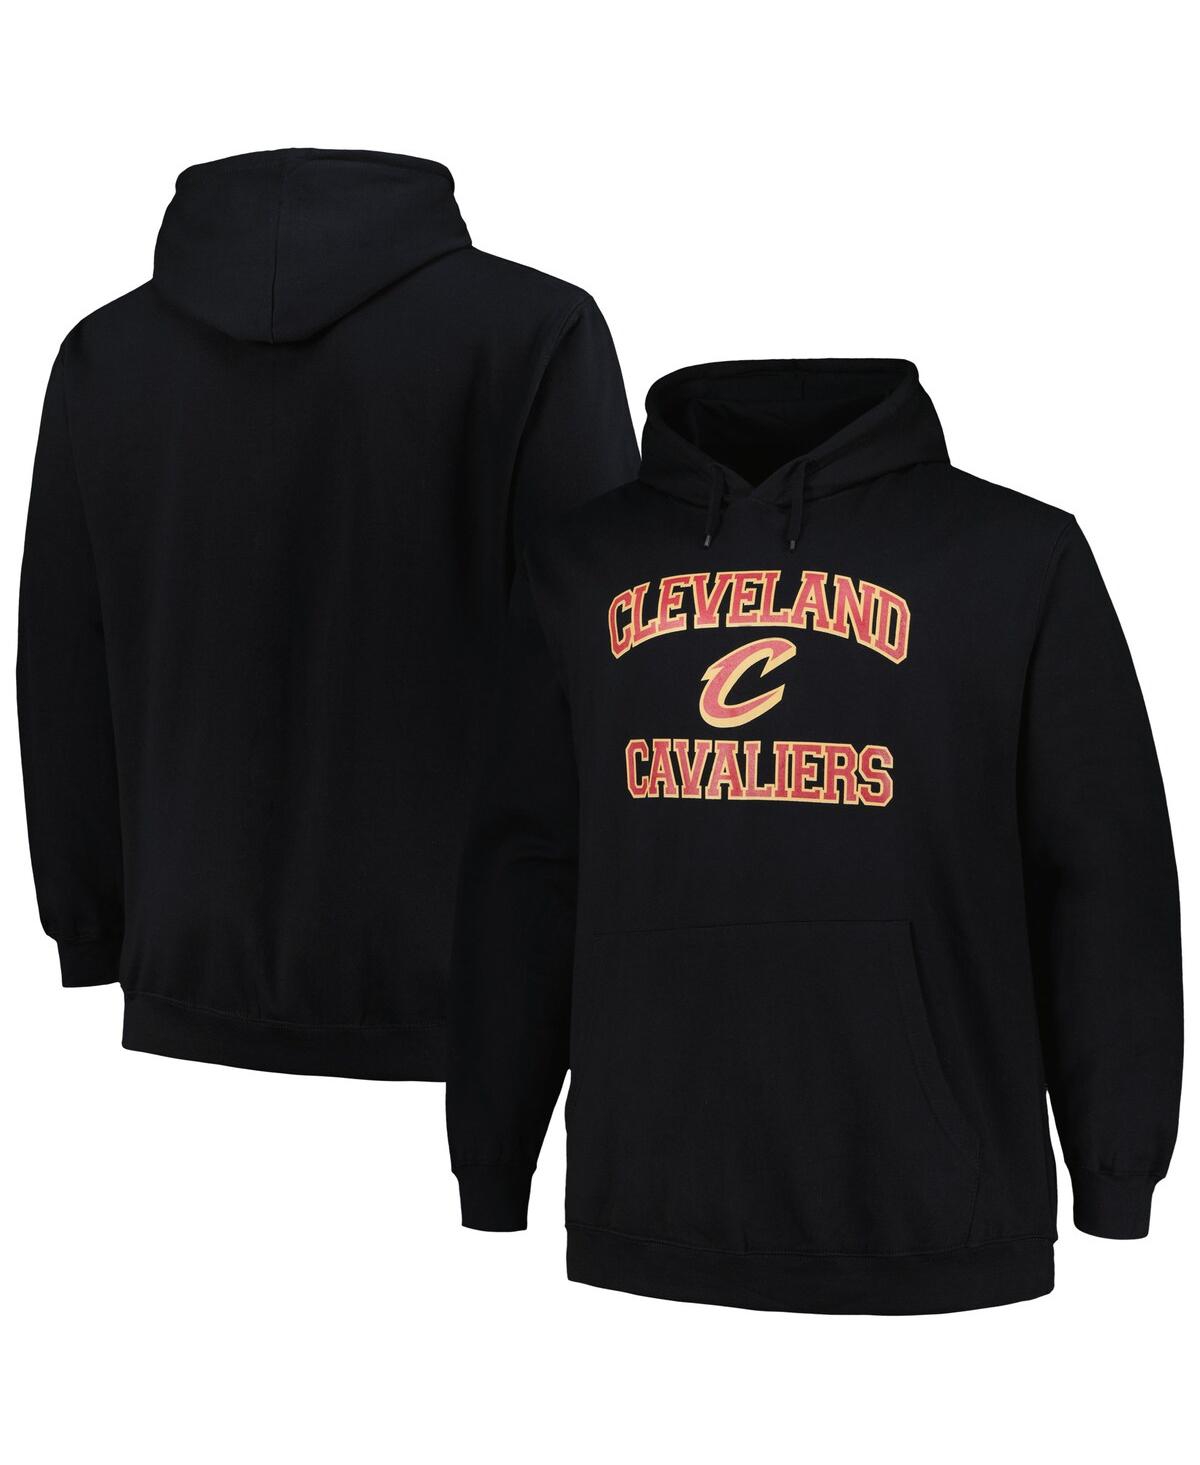 Men's Black Cleveland Cavaliers Big and Tall Heart and Soul Pullover Hoodie - Black